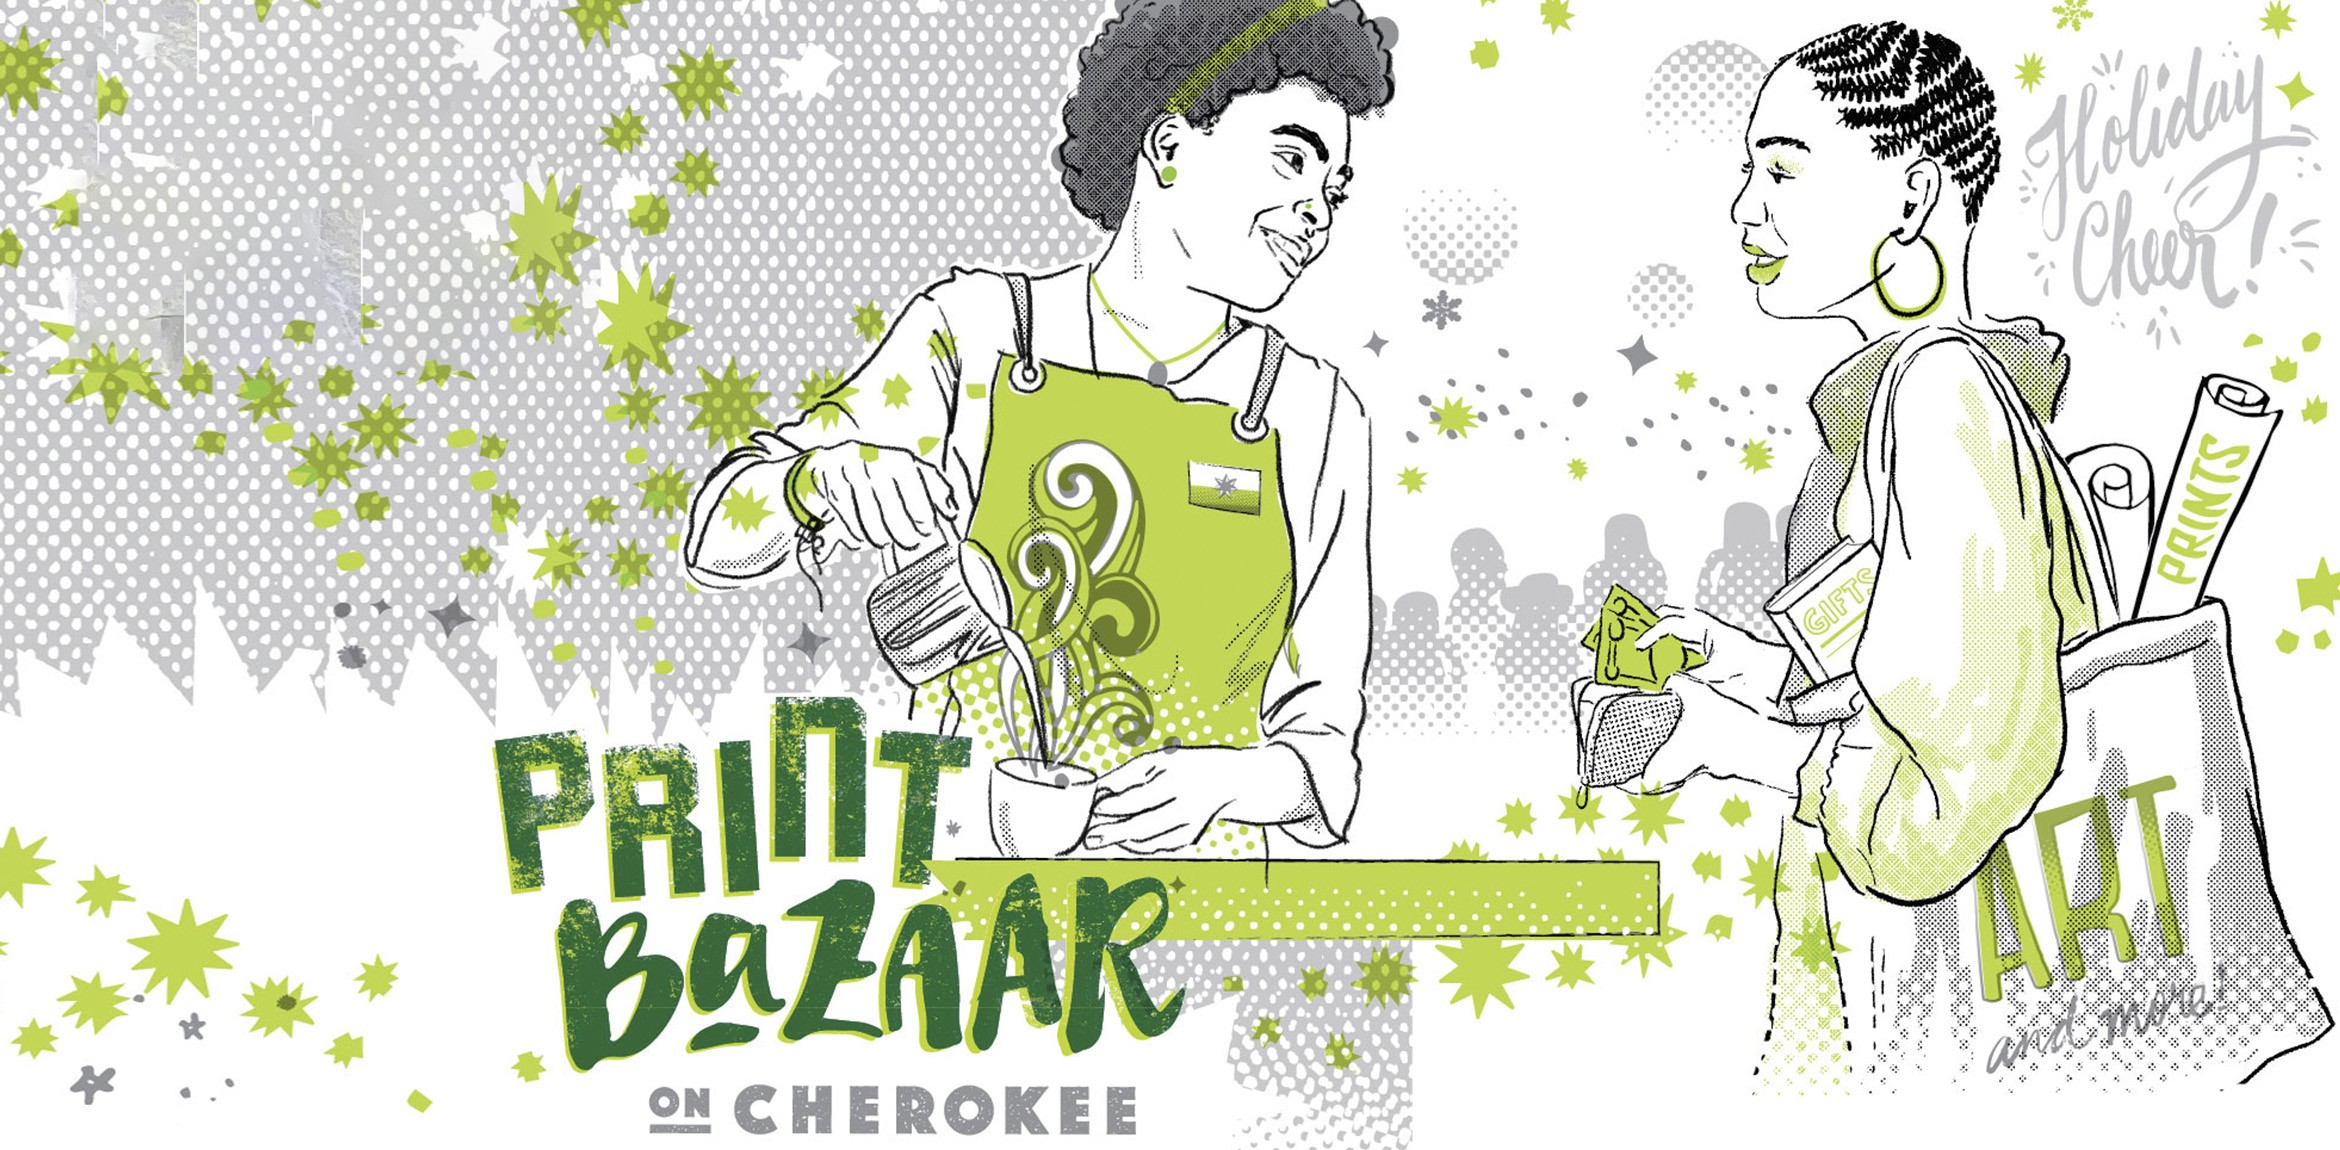 Halftone silkscreen style poster of a person serving coffee and another person getting ready to pay with the text Print Bazaar